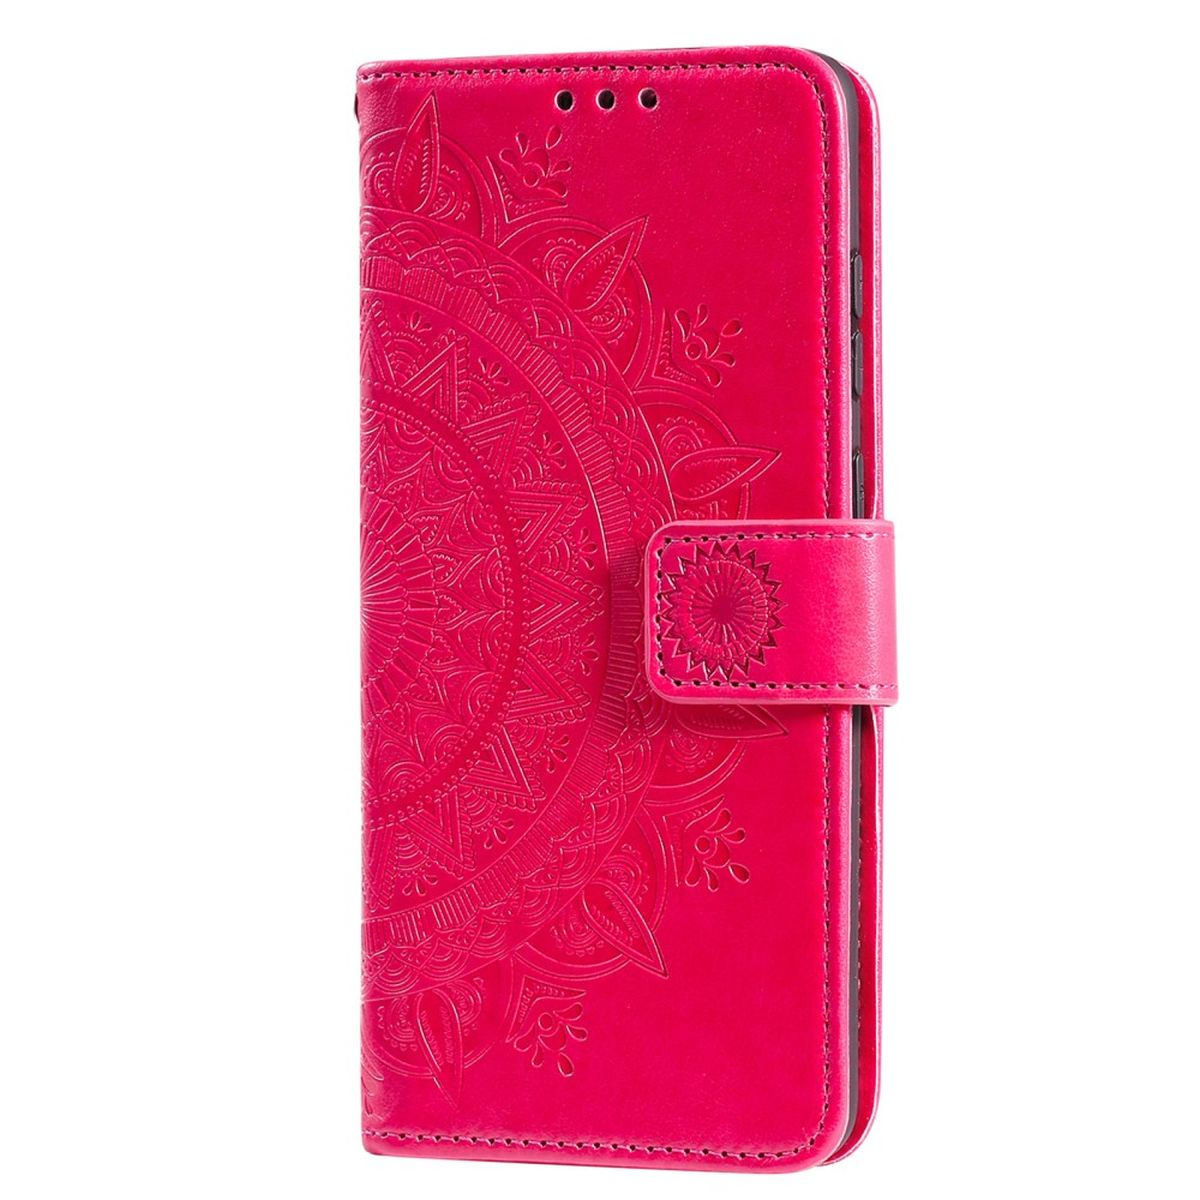 COVERKINGZ Klapphülle mit A13 Muster, Bookcover, Mandala 5G/Galaxy Pink A04s, Galaxy Samsung